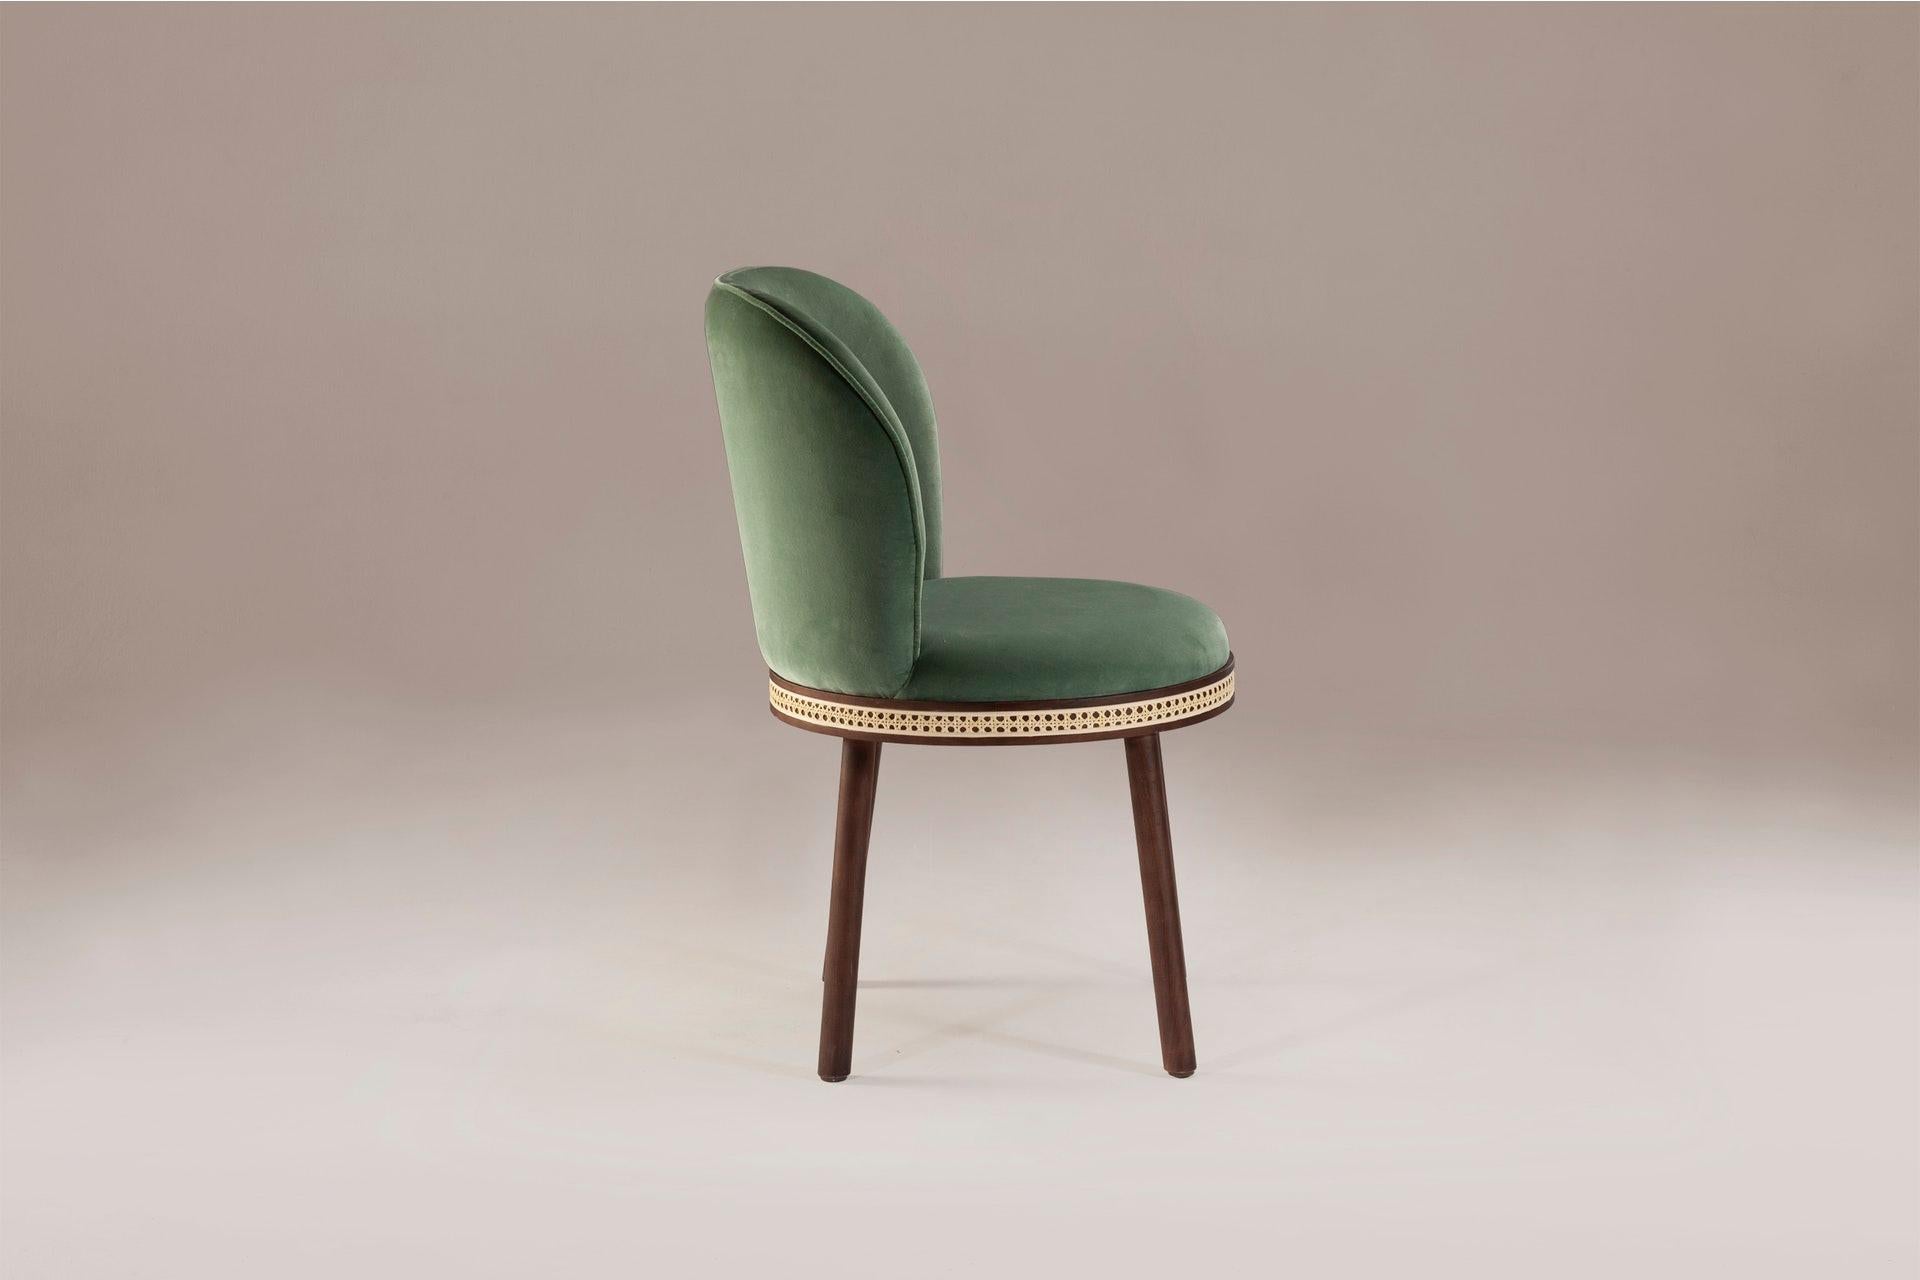 DOOQ Mid-Century Modern Dinning Chair Alma with Green Velvet, Walnut Wood Legs

In a piece that combines classic and modern aesthetics we can find a certain harmonic gracefulness paired with an intimate voluptuousness that can embrace you and